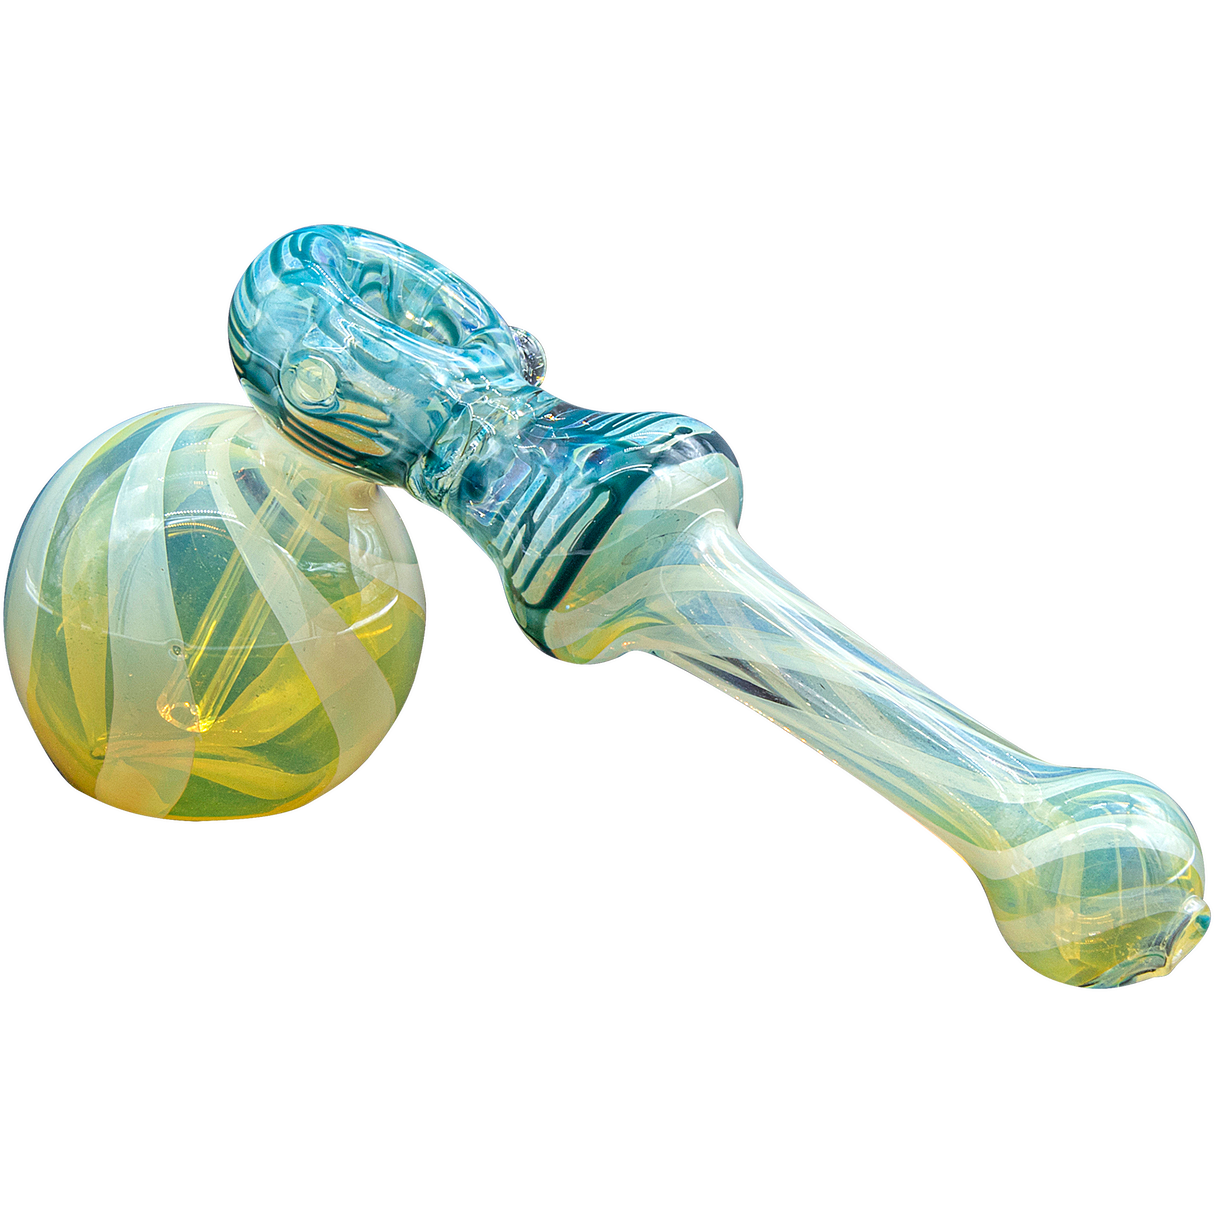 LA Pipes "Raked Hammer" Fumed Hammer Bubbler Pipe in Blue and Yellow Swirl Design